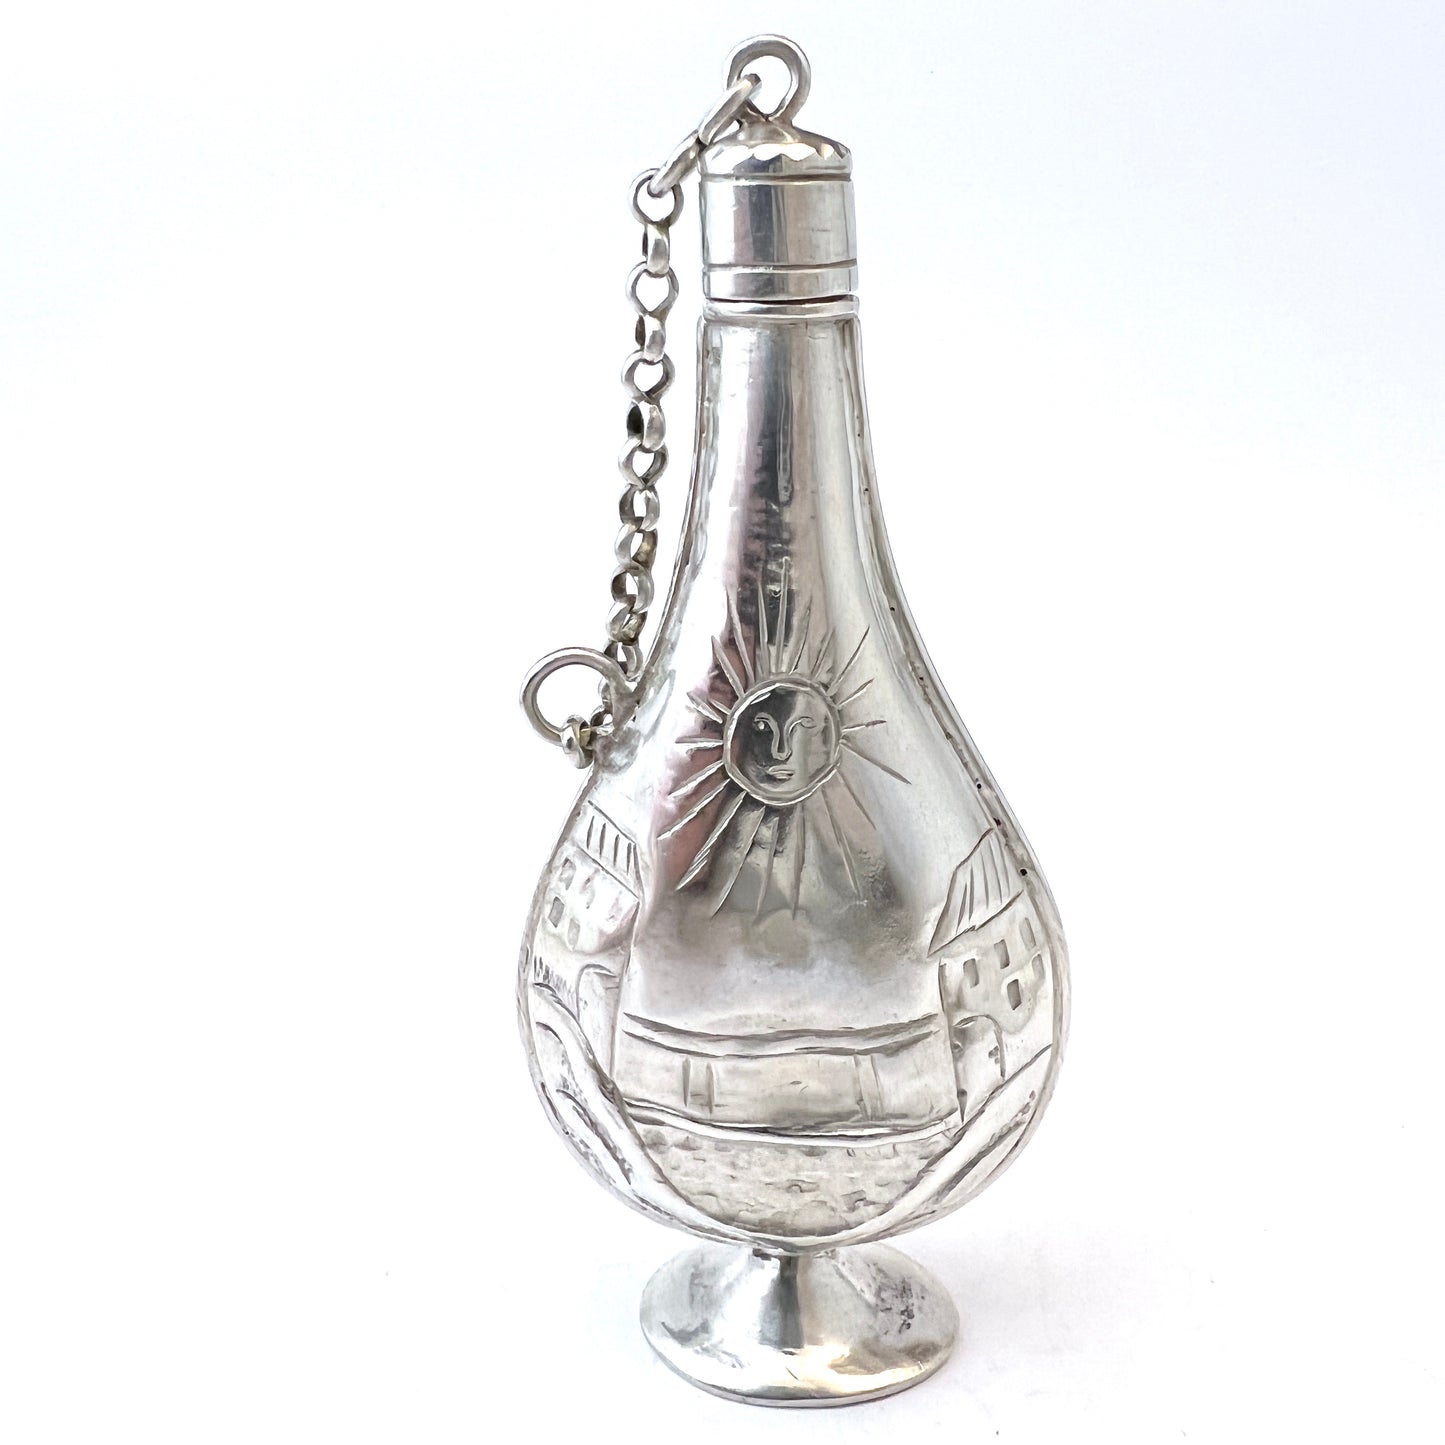 Austrian Empire 1840-50s. Antique Solid Silver Perfume or Holy Oil Bottle